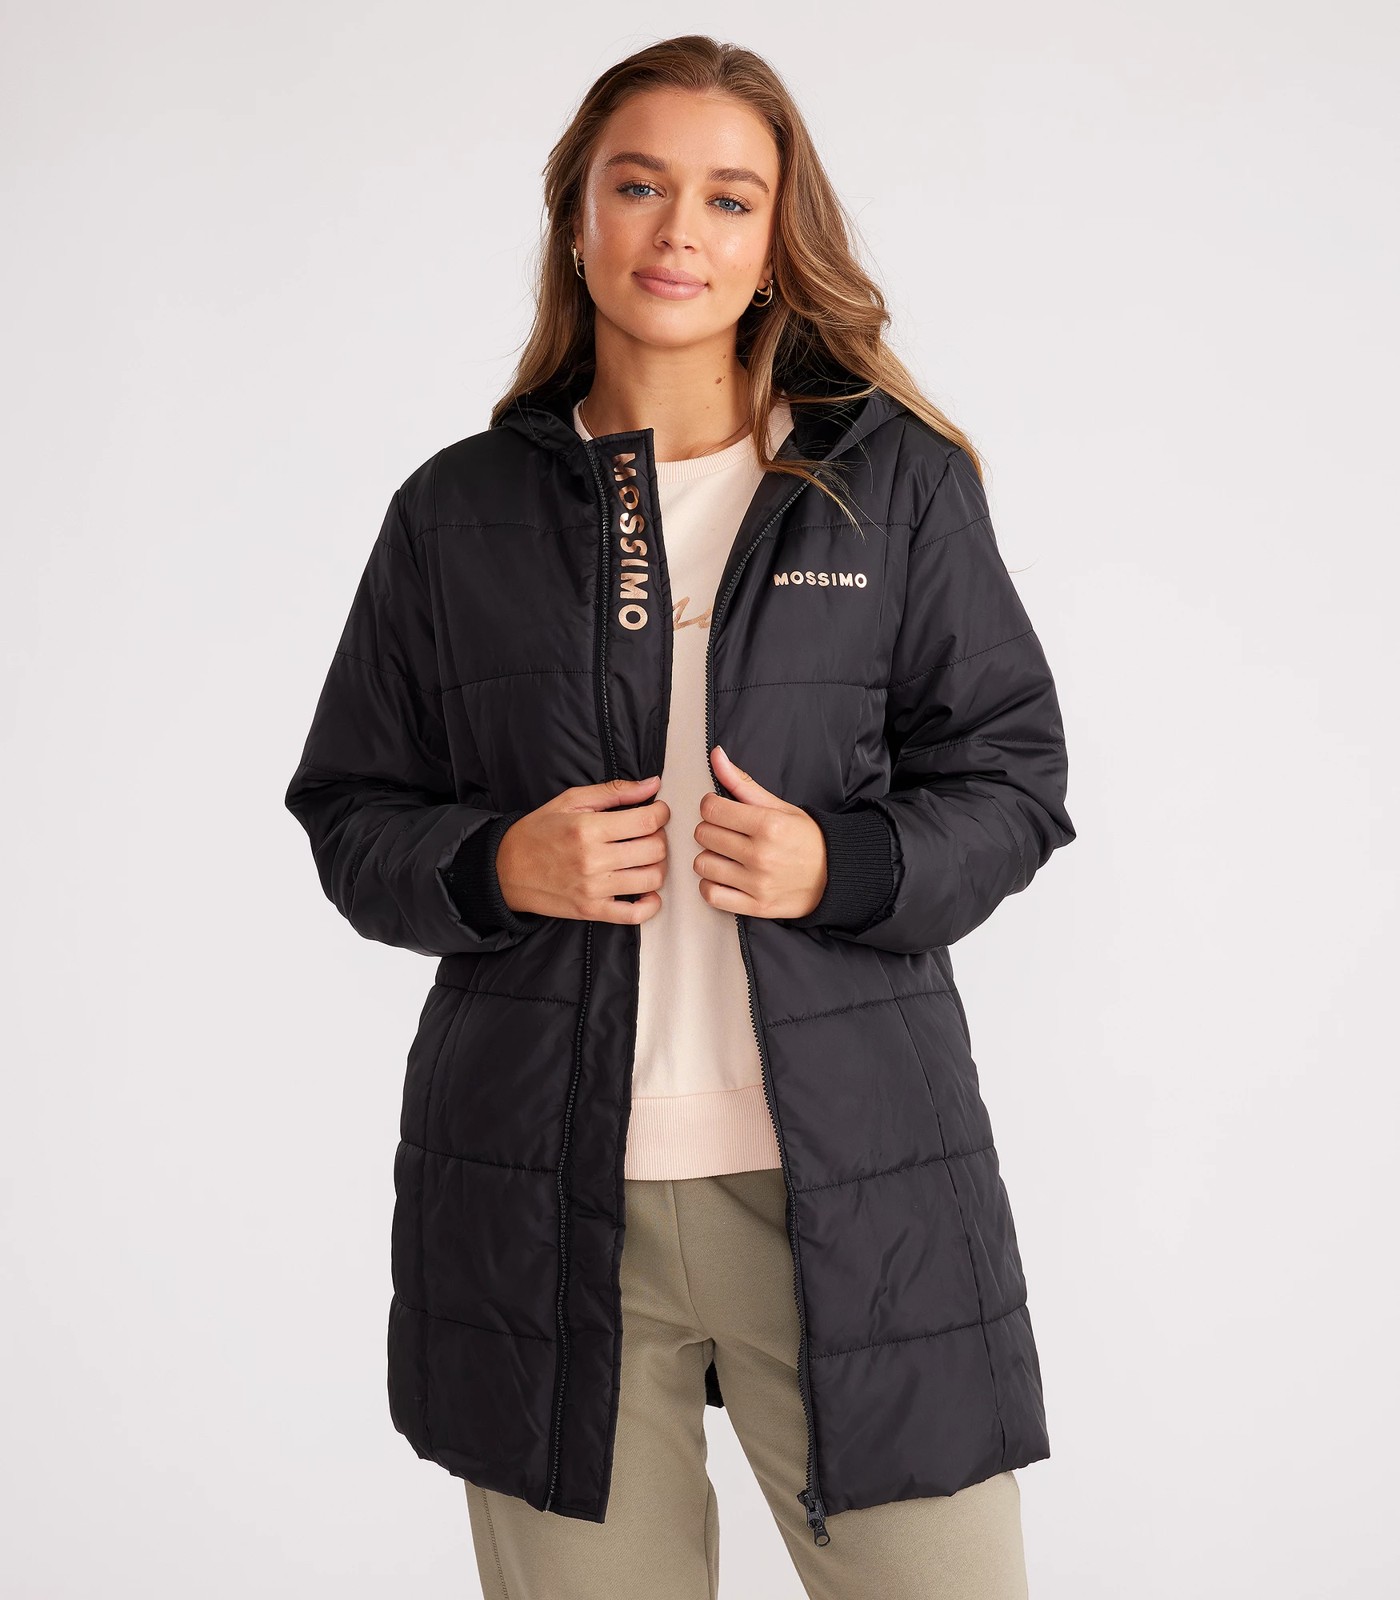 Mossimo Lils Puffer Jacket